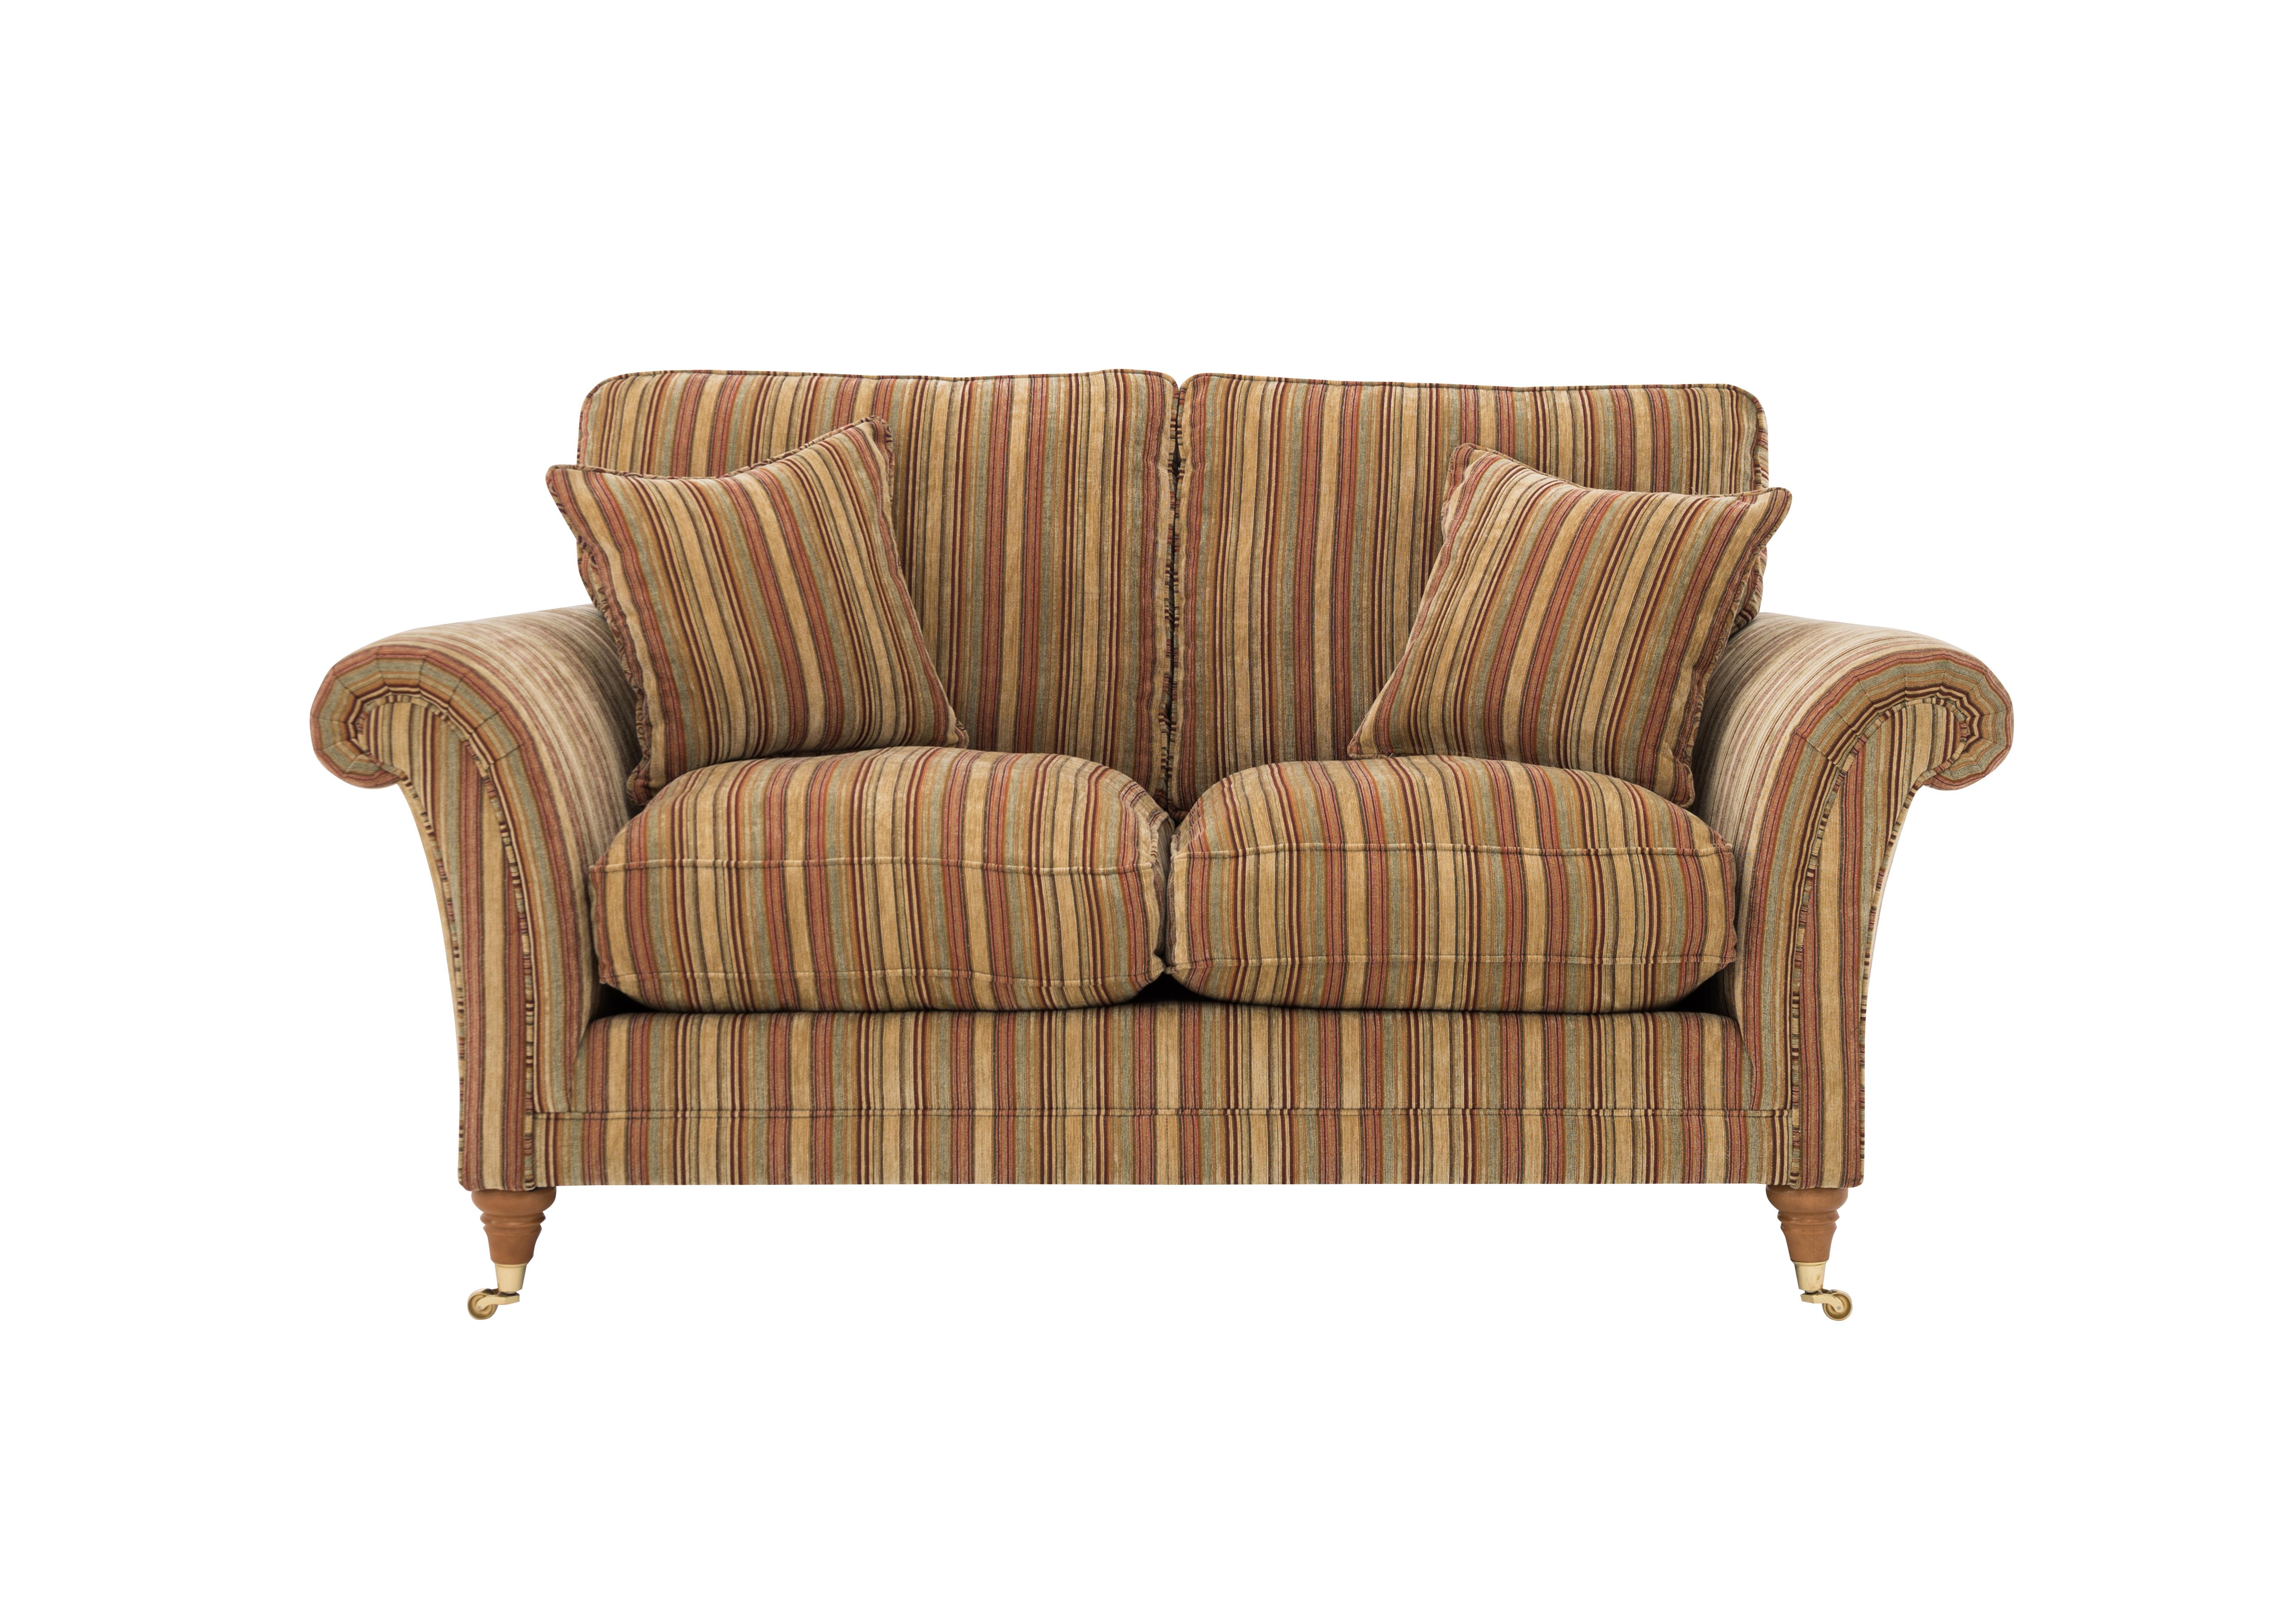 Burghley 2 Seater Fabric Sofa in 50029-318 Baslow Stripe Gold on Furniture Village